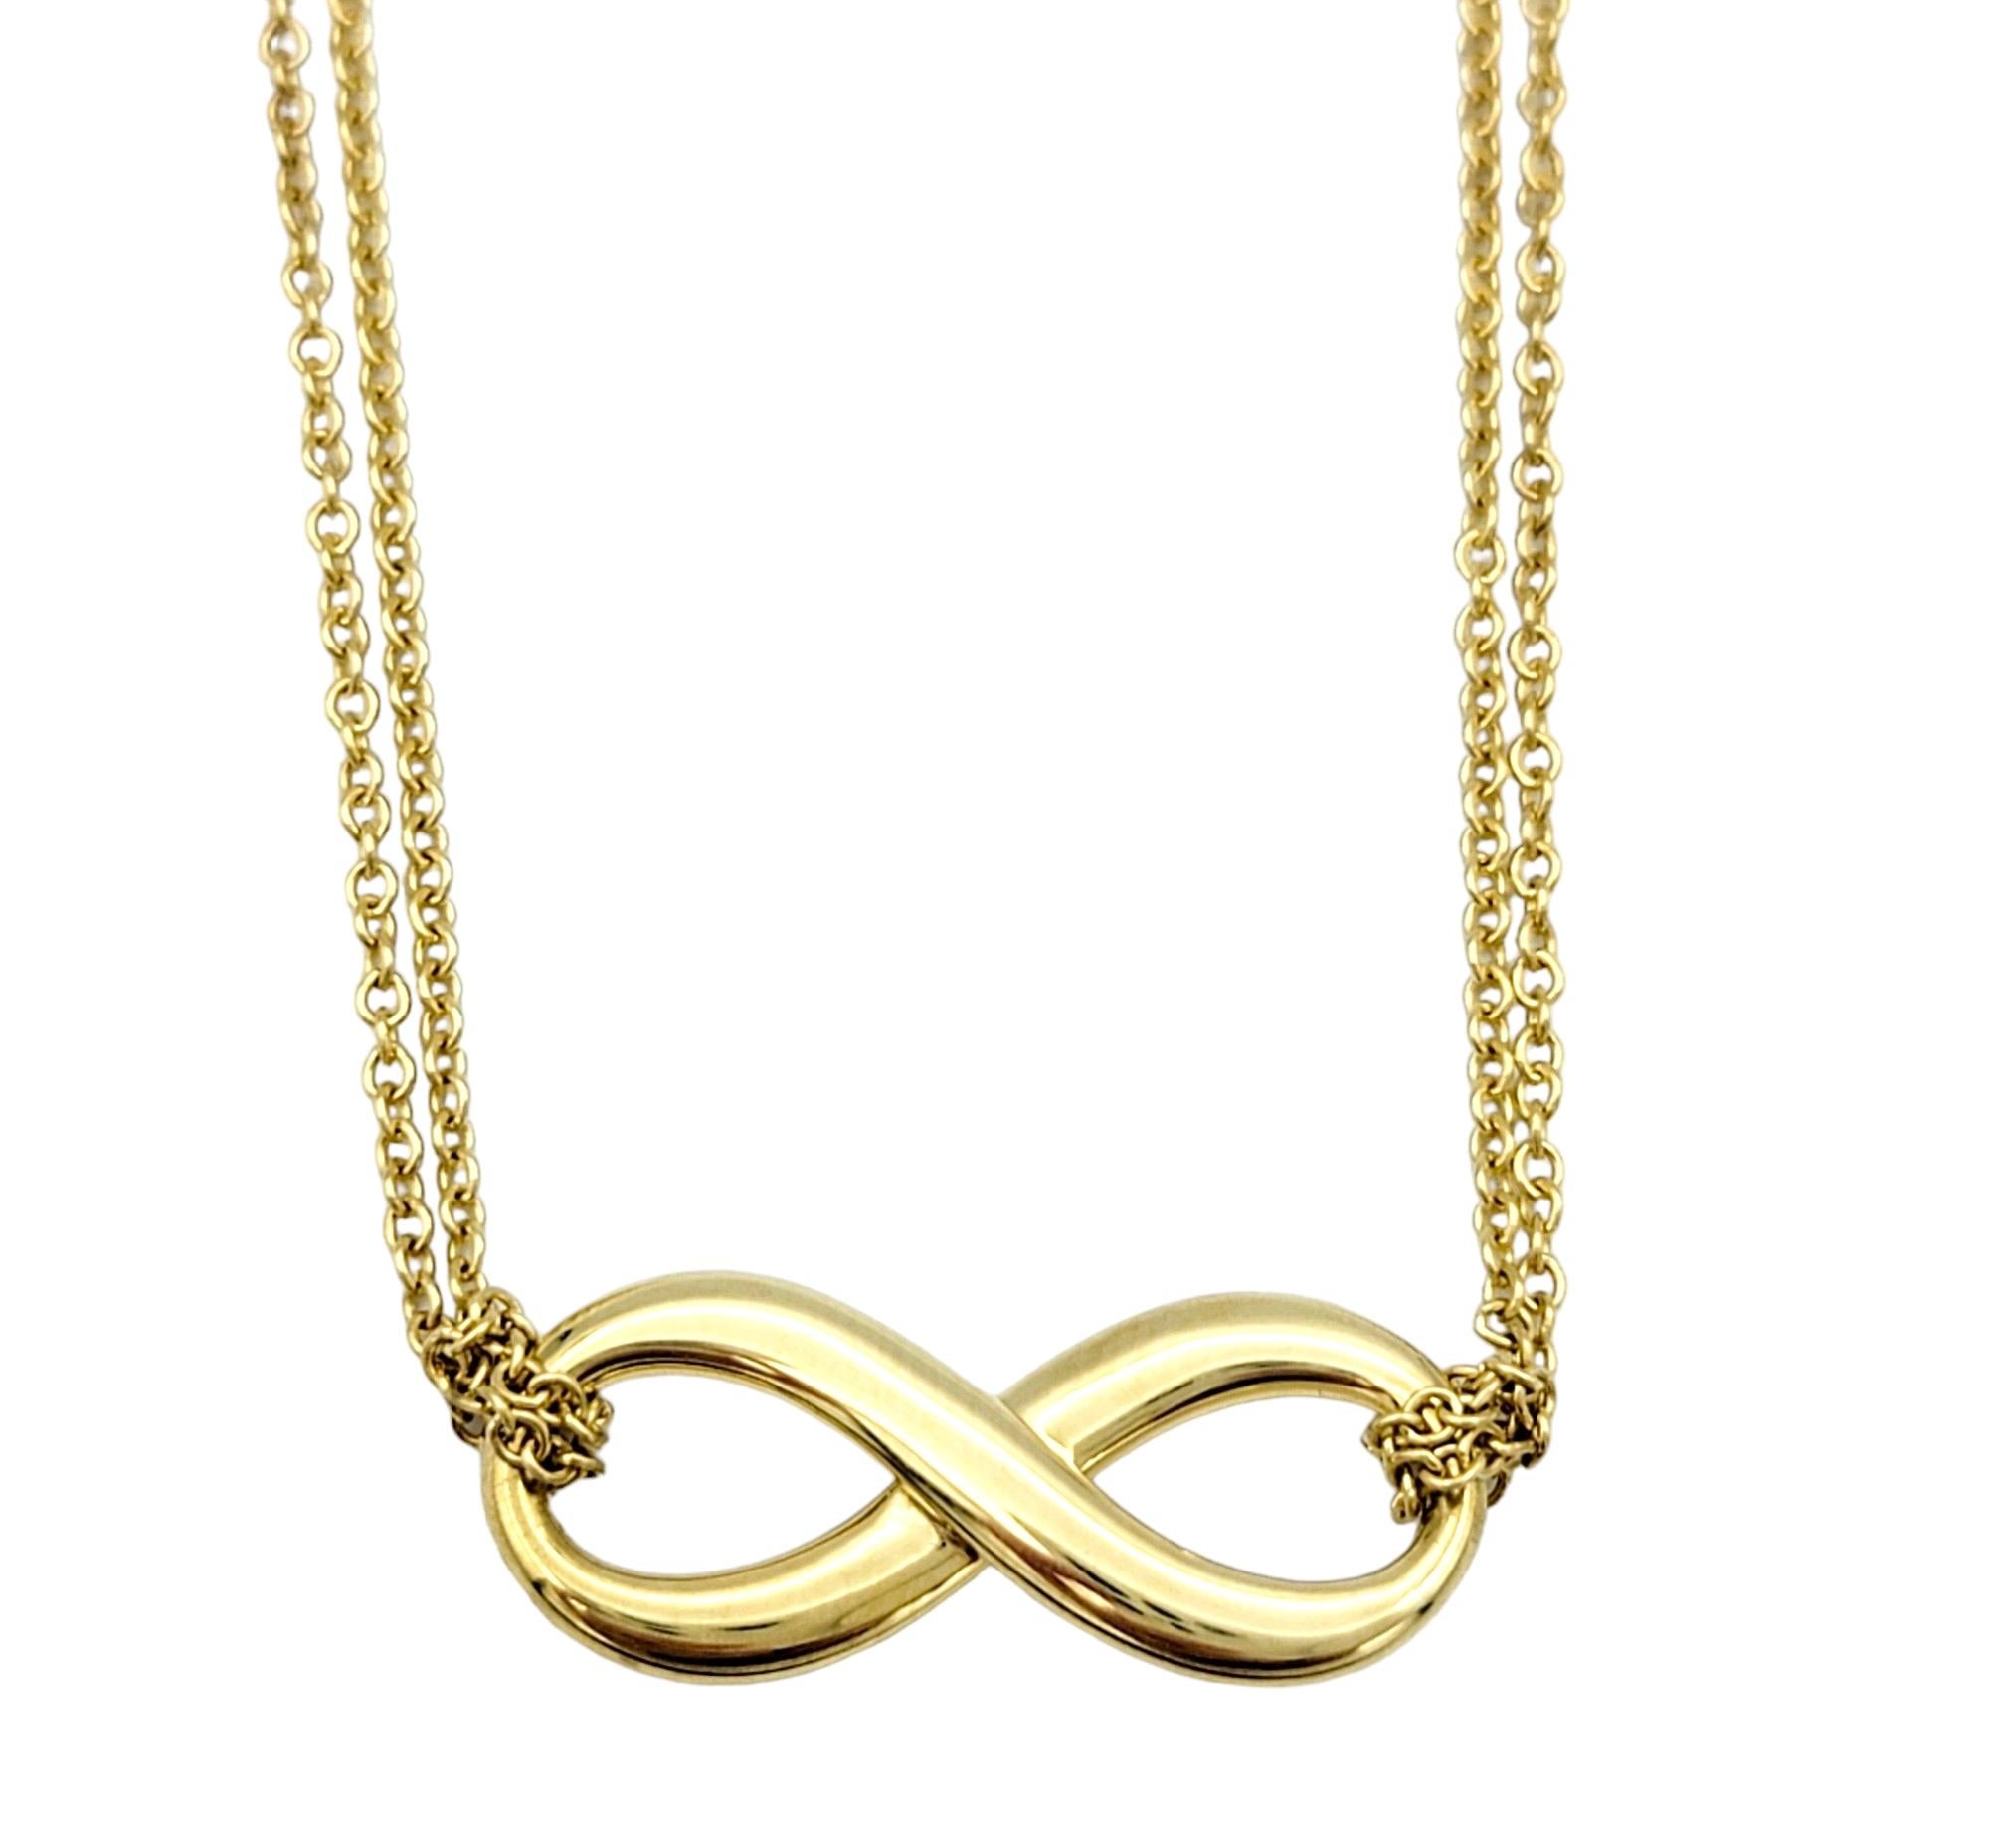 This stunning Tiffany & Co. double chain infinity pendant necklace in 18 karat yellow gold is a stunning piece of jewelry that exudes elegance and sophistication. The pendant features the iconic infinity symbol, representing eternity and everlasting